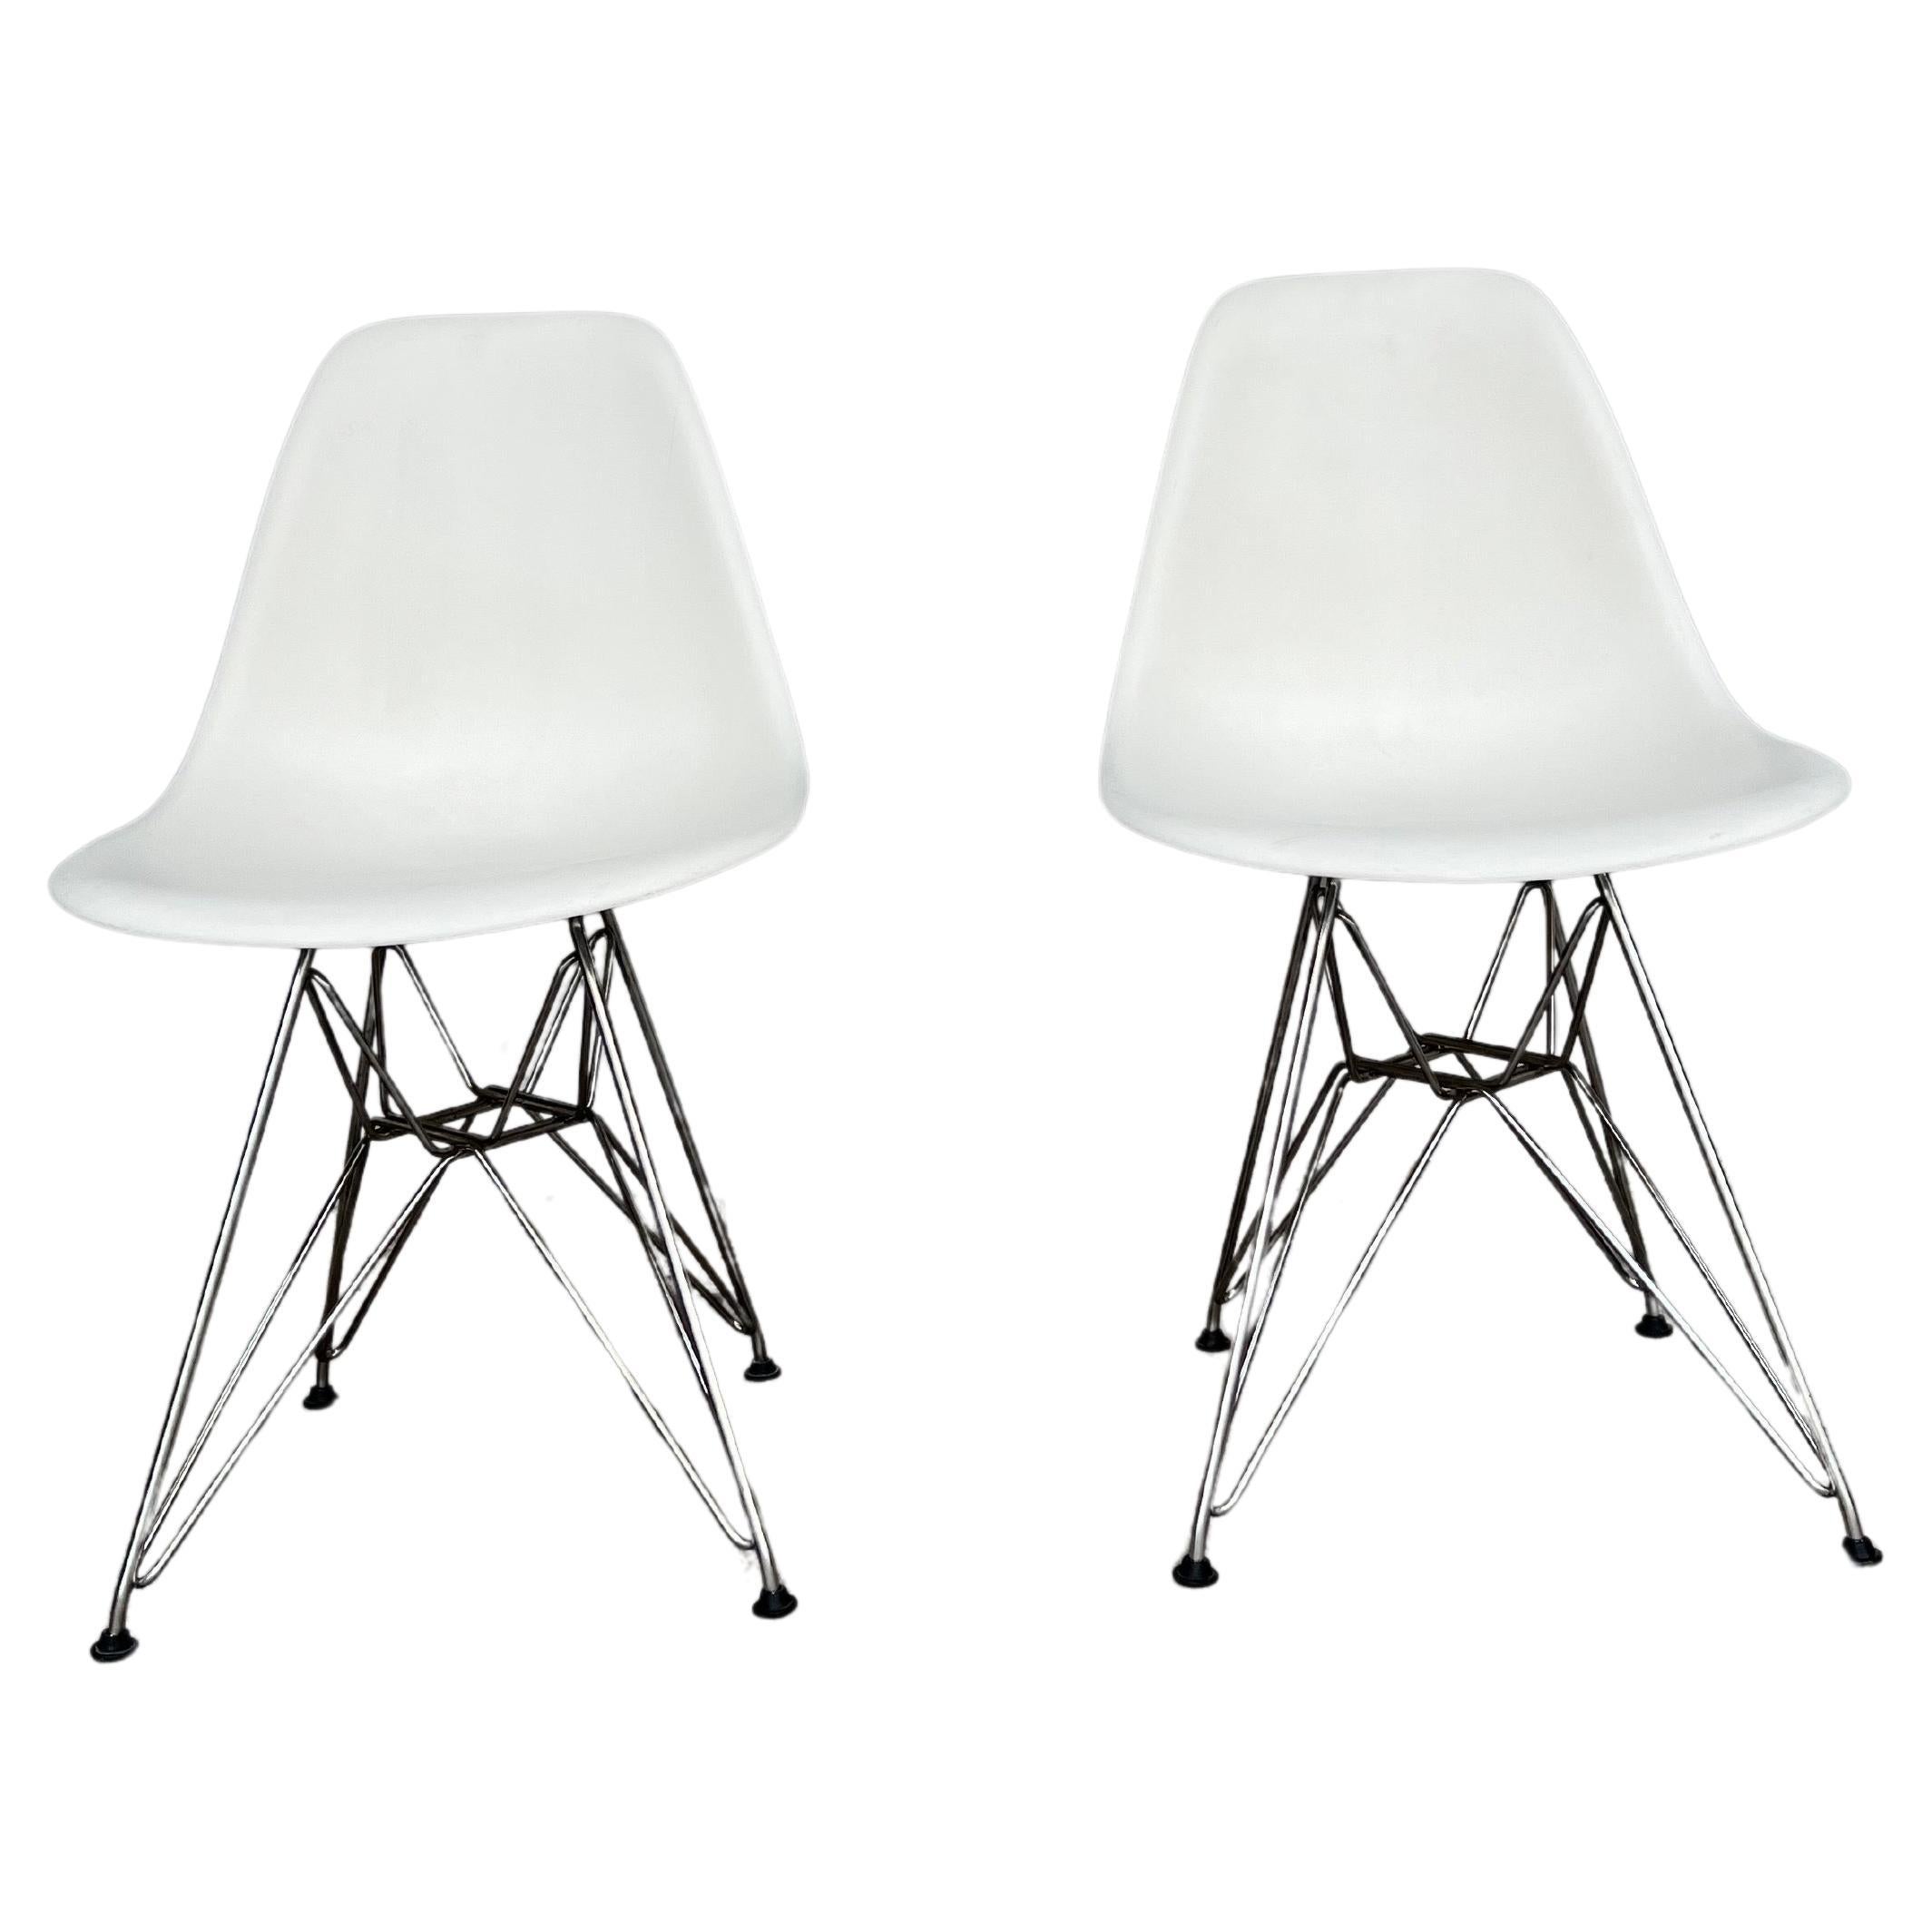 Pair of Eames Molded White Plastic Chairs with Eiffel Tower Bases